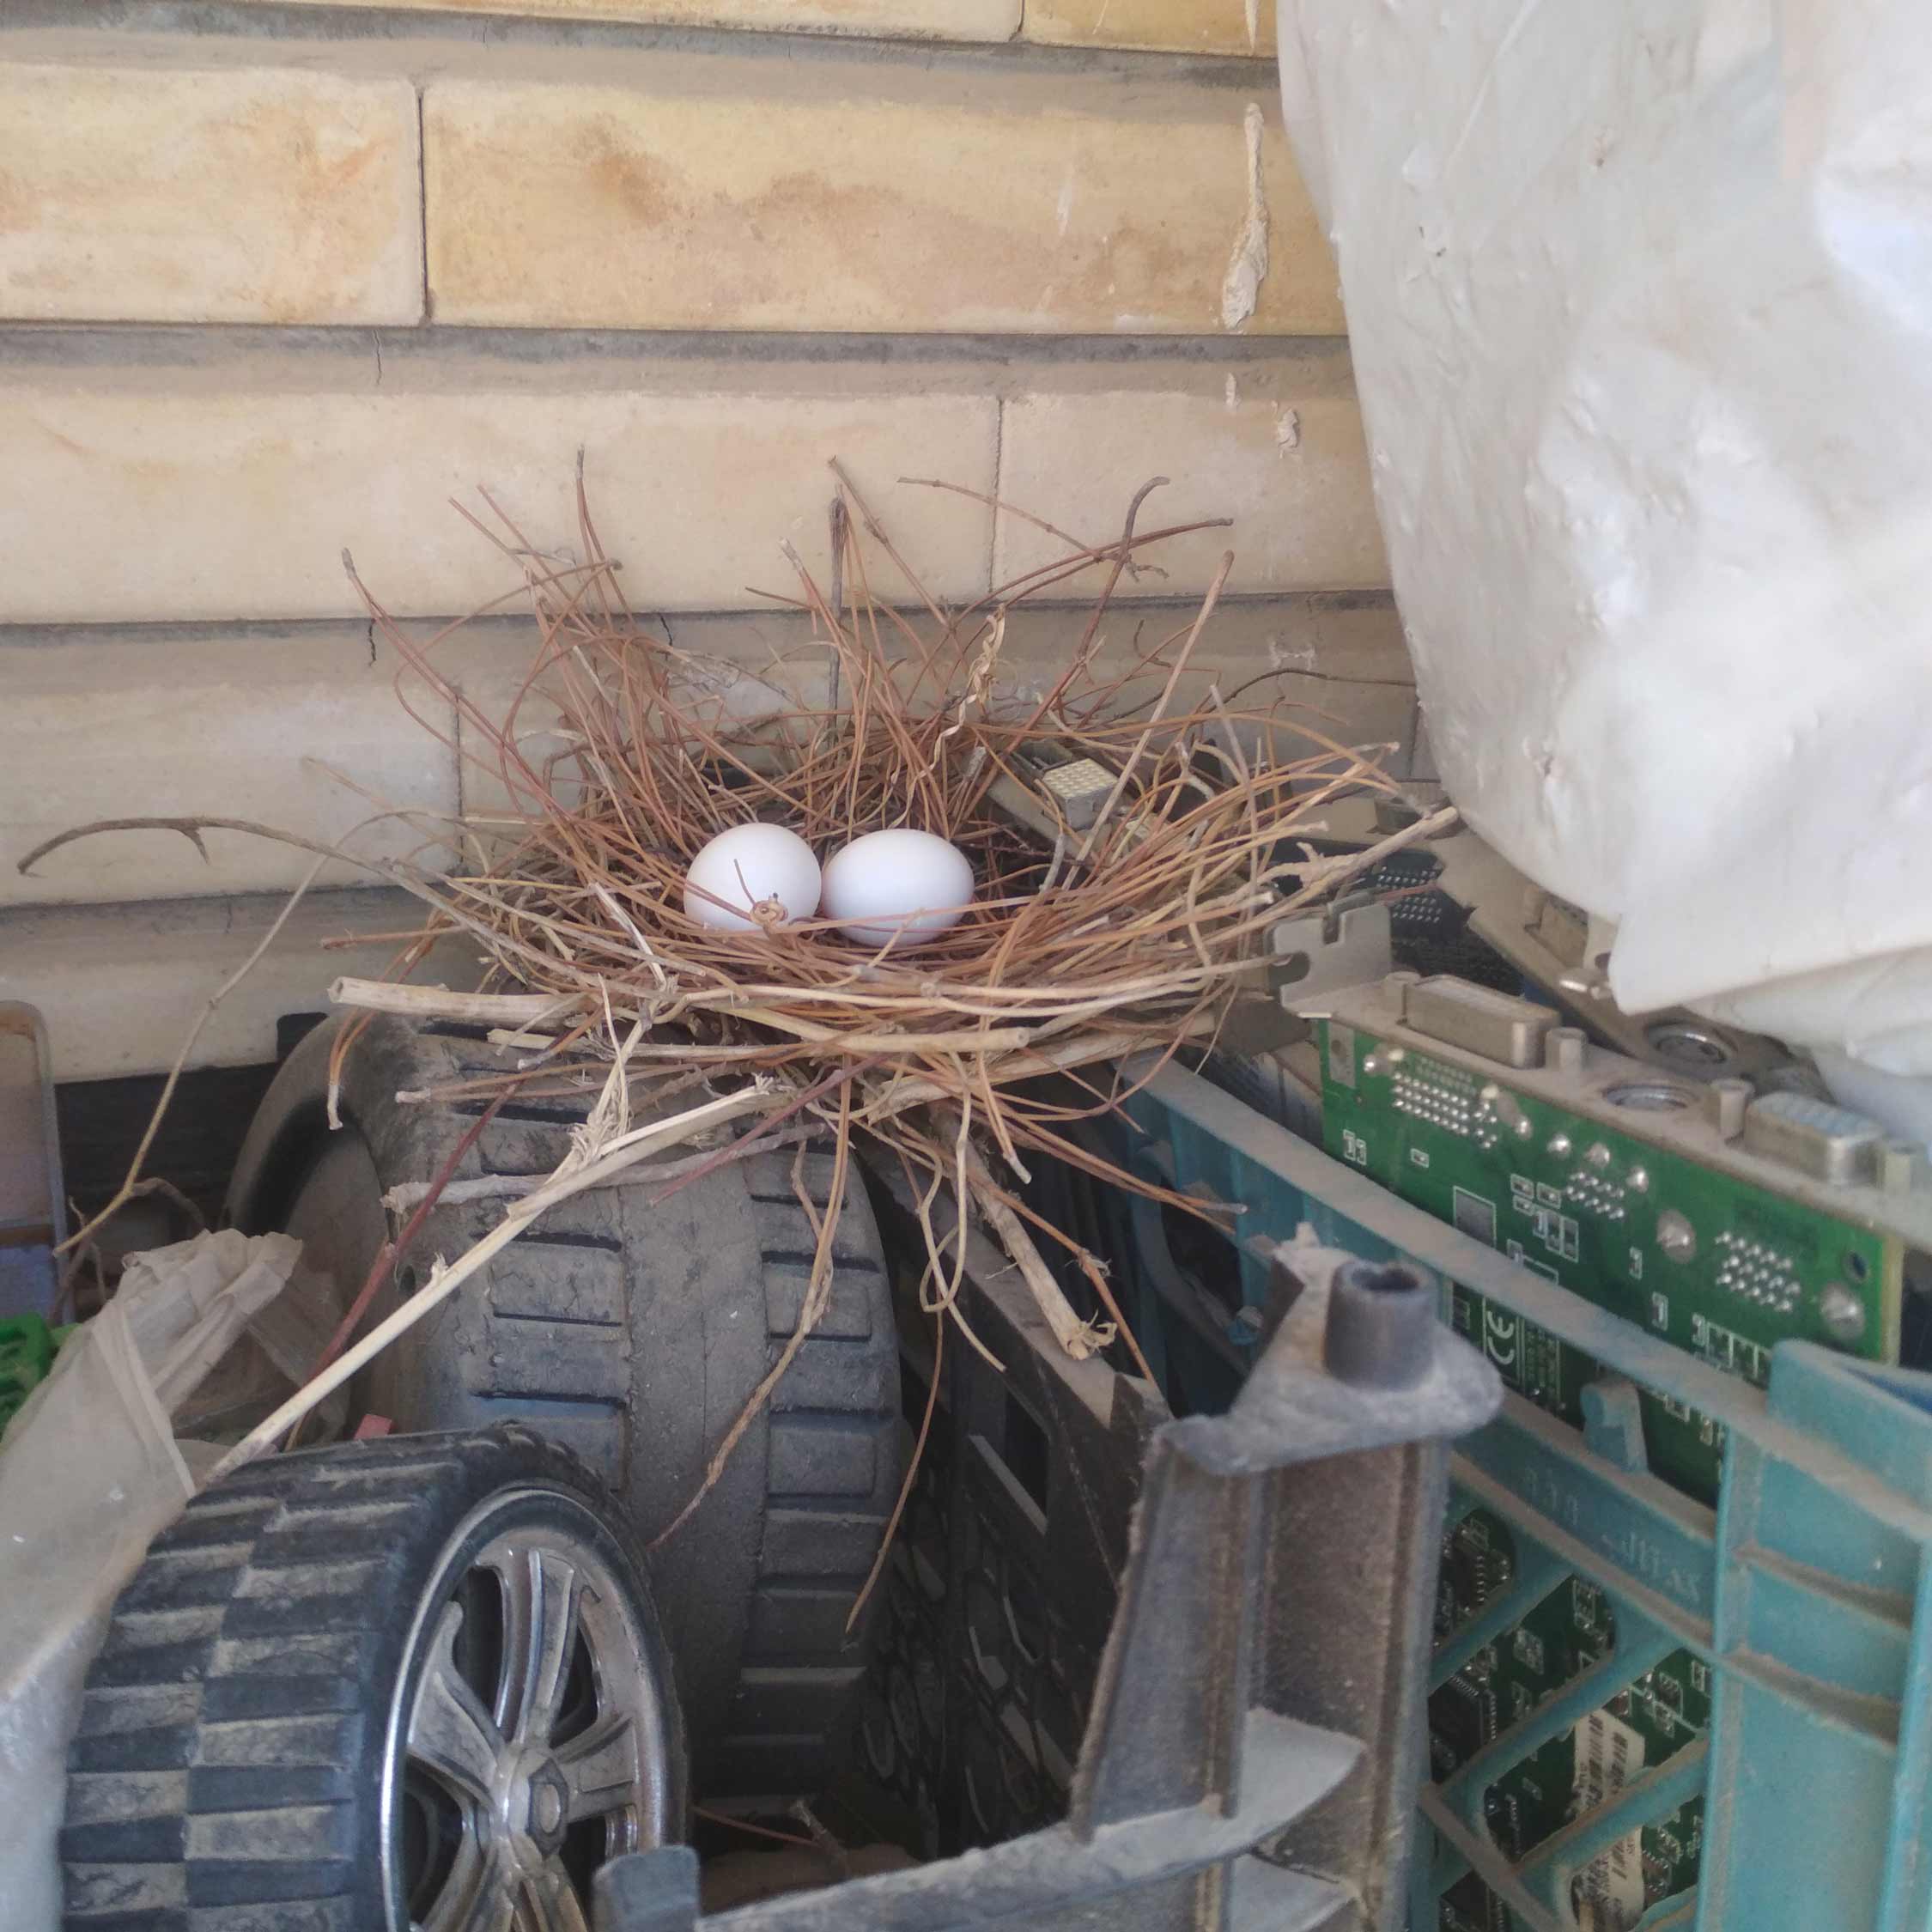 A pair of Laughing Dove eggs inside a well made nest on top of toy car tires